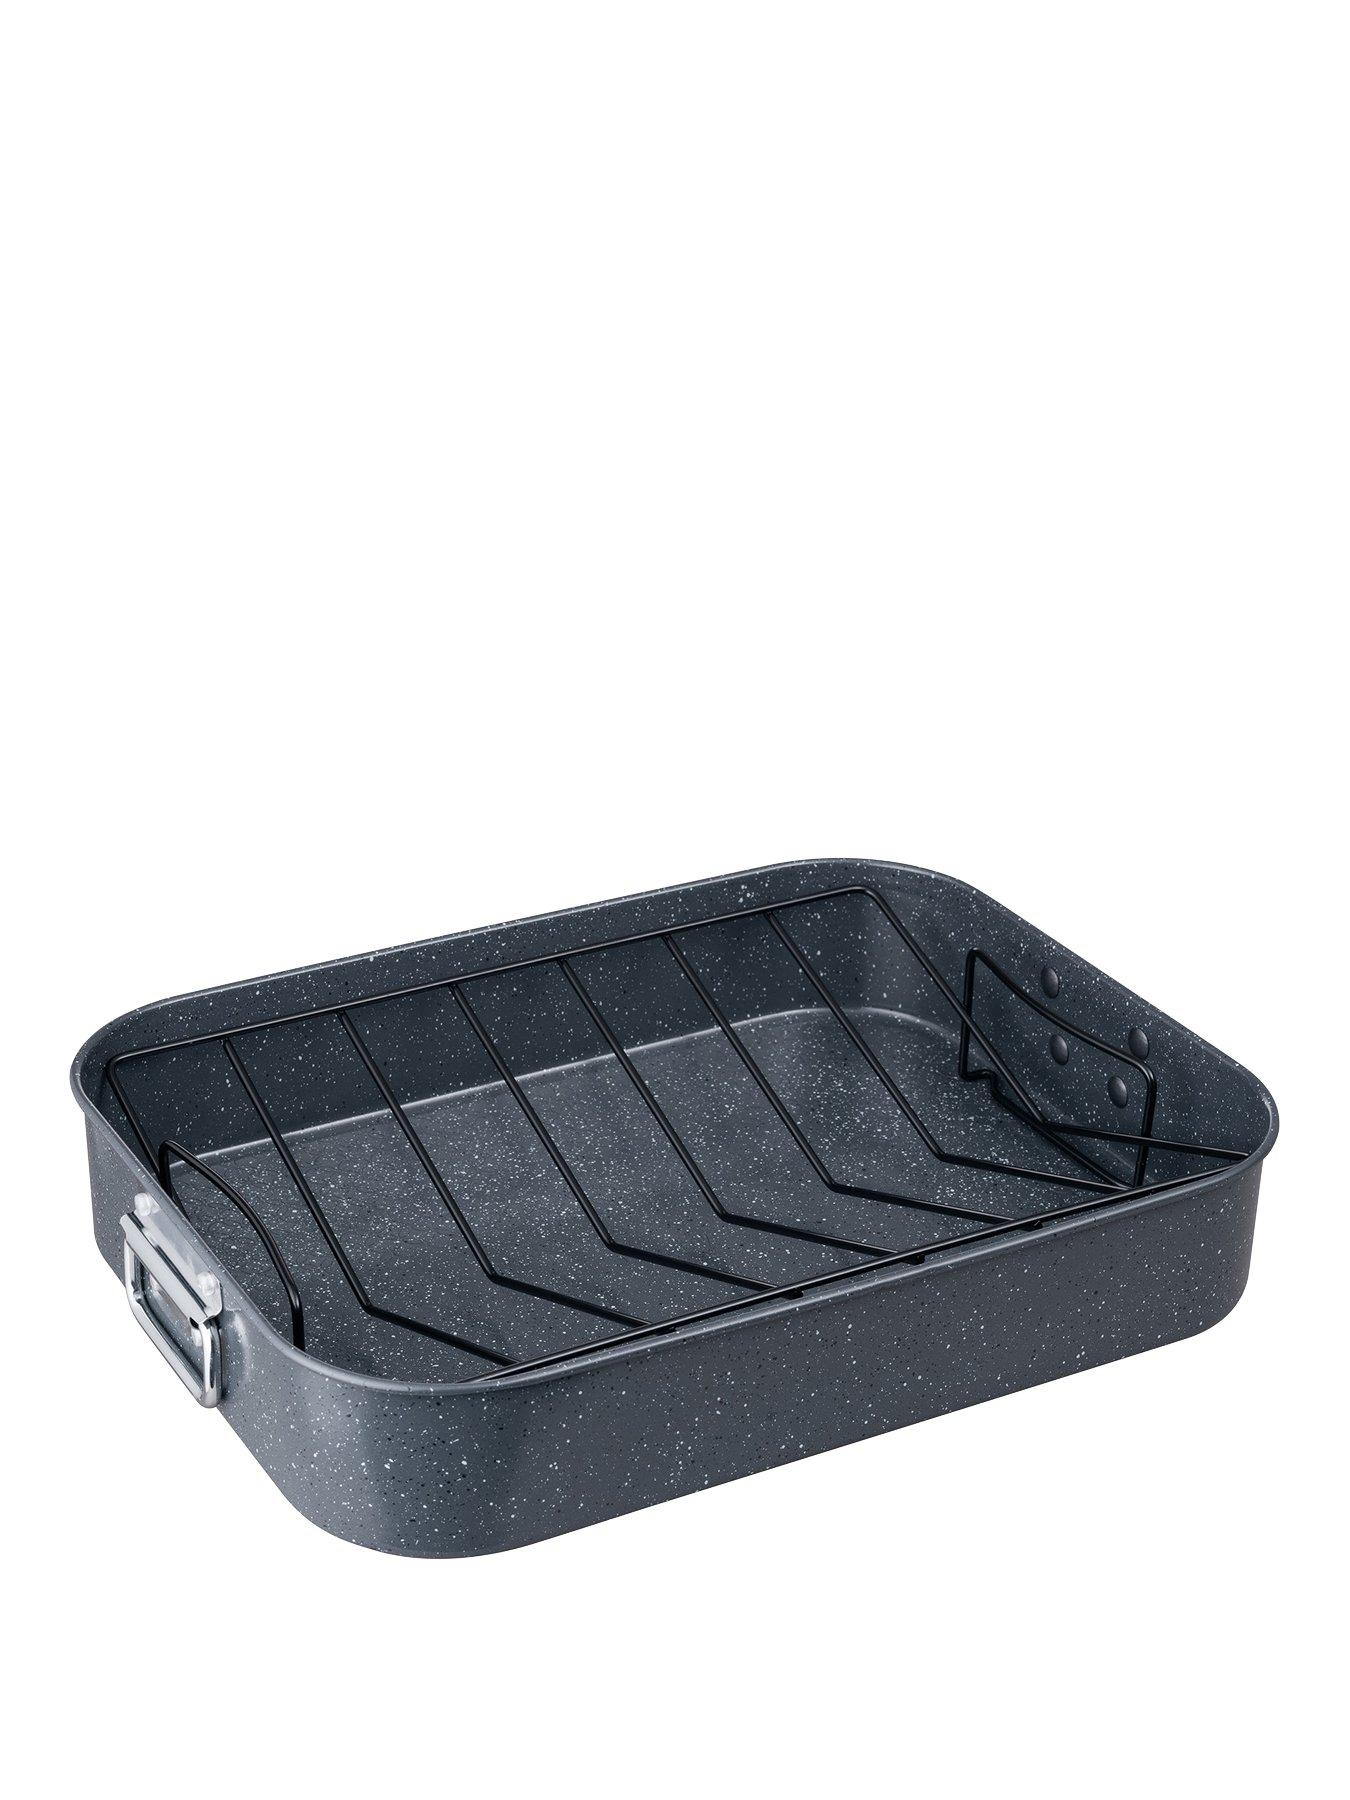 MasterClass Small Baking Tray, Scratch Resistant Vitreous Enamel and  Induction Safe 1 mm Thick Steel, 24 x 18 cm